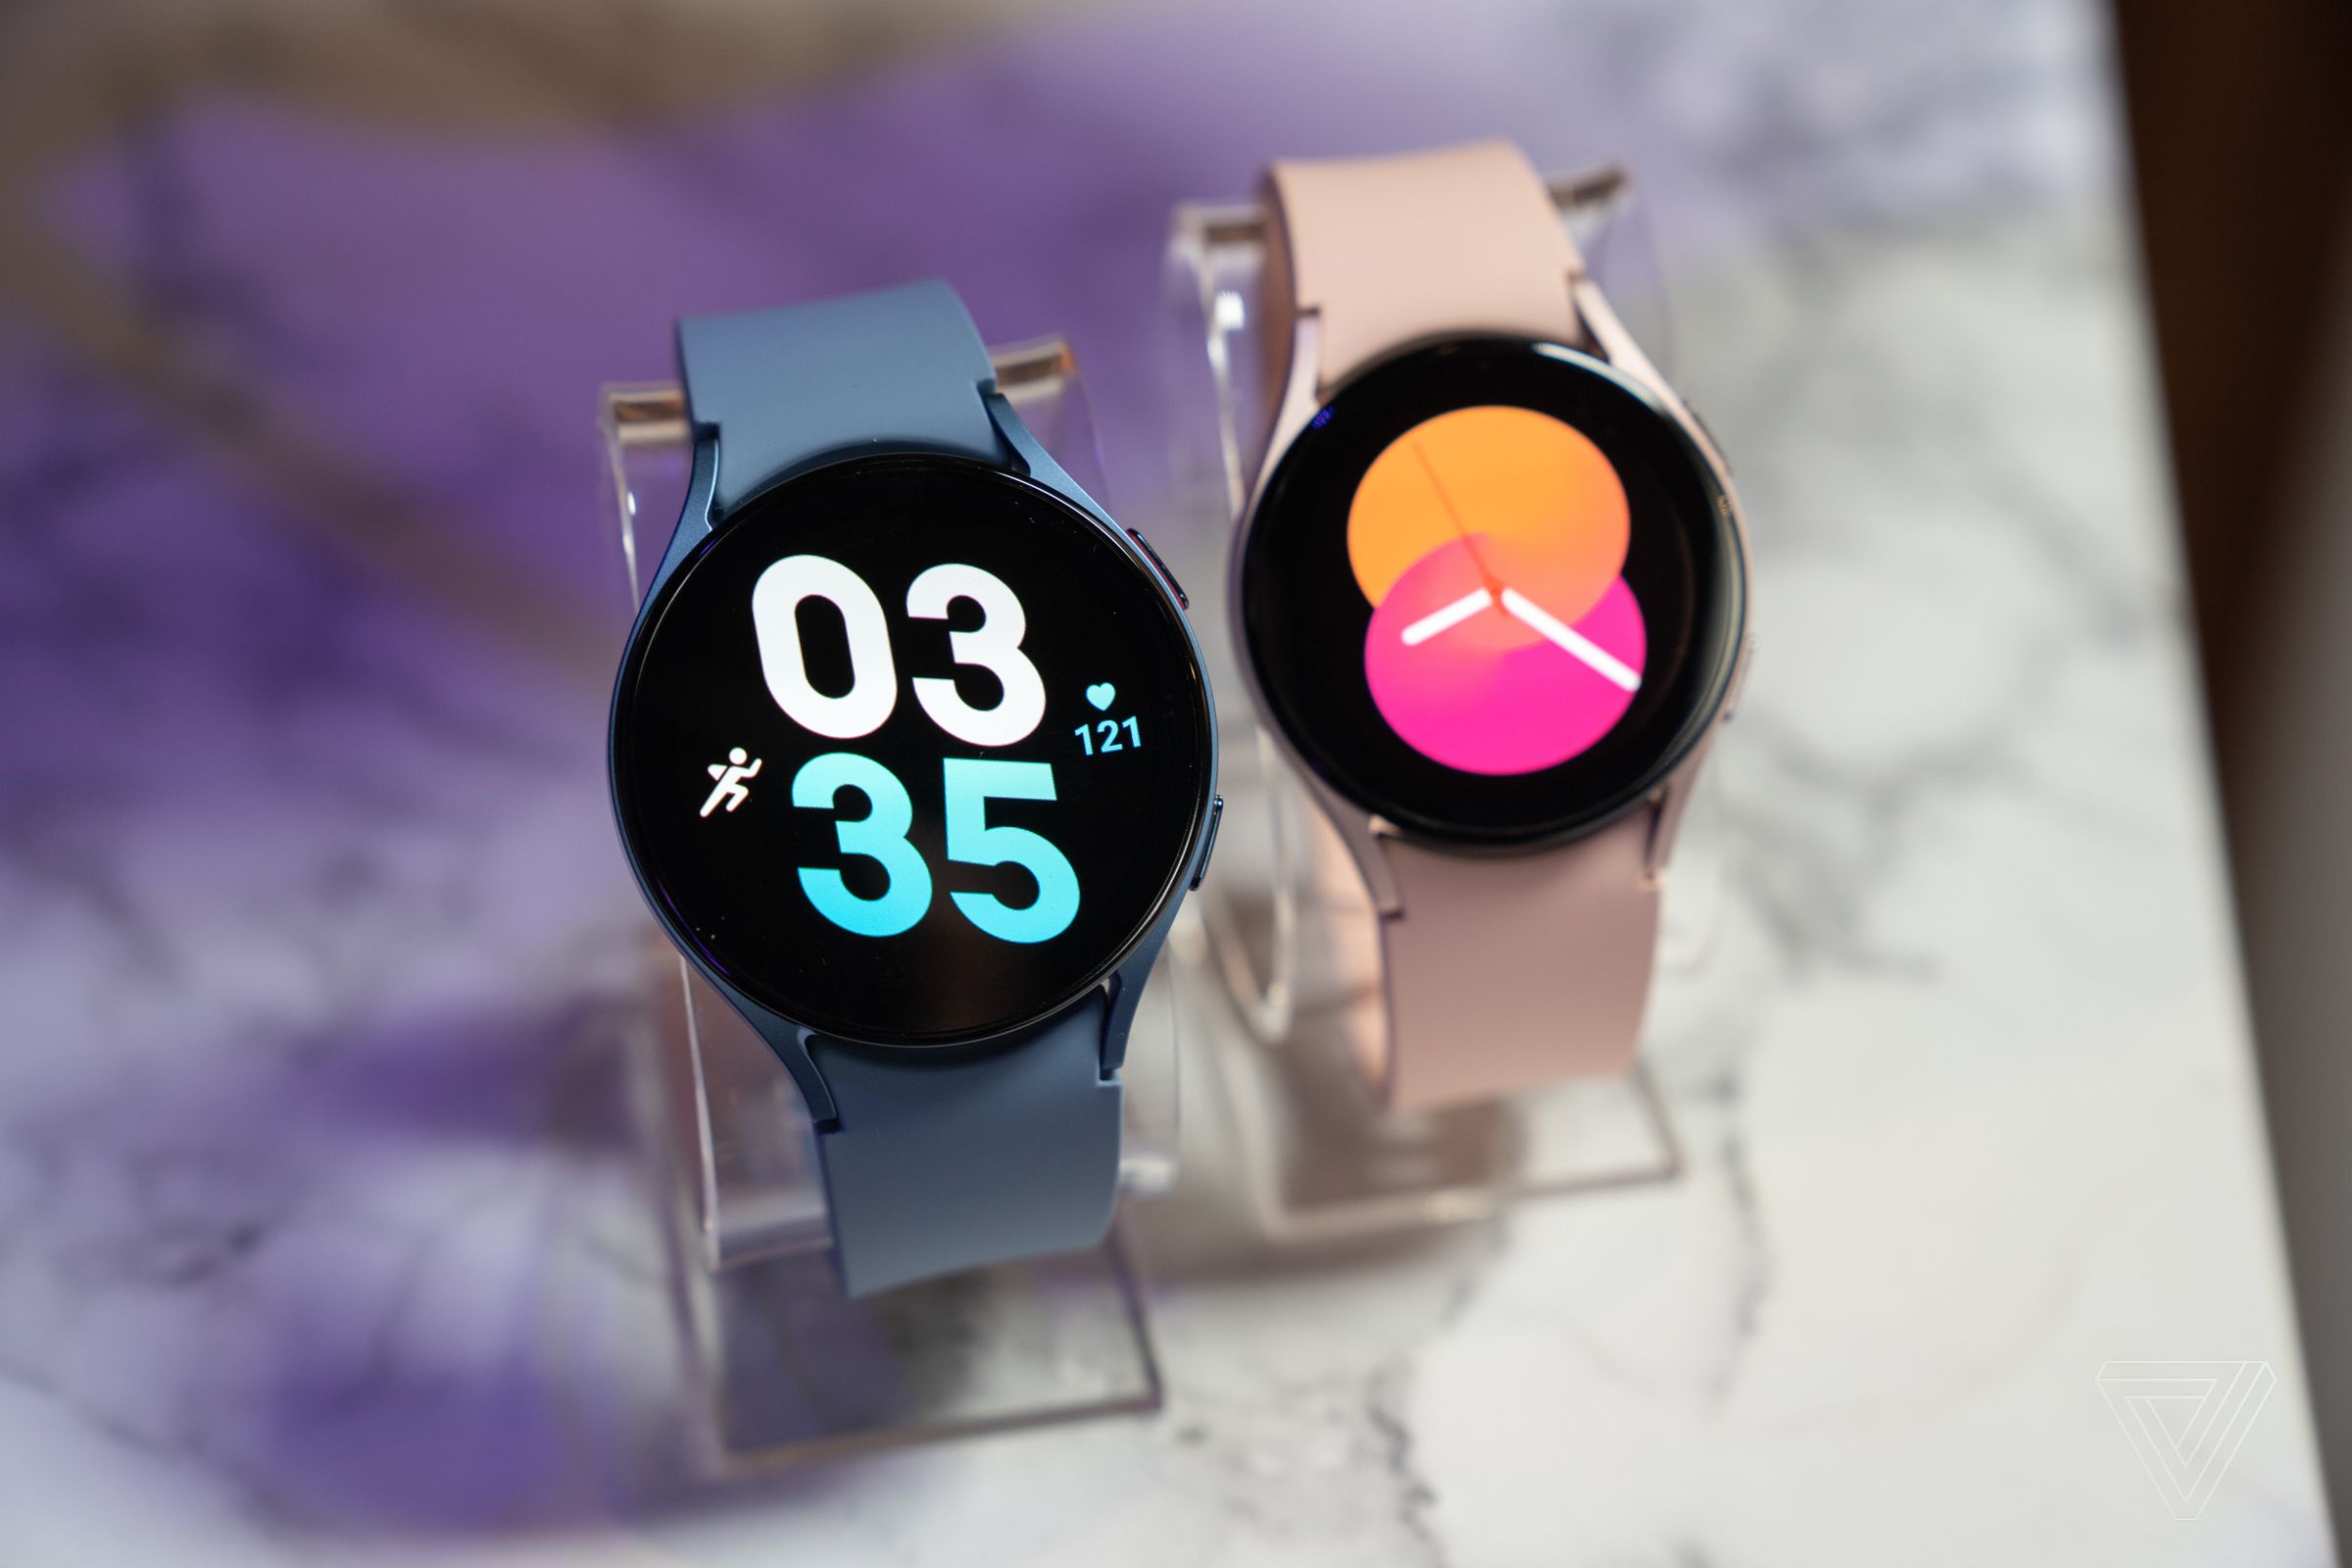 Both sizes of the Galaxy Watch 5 side by side